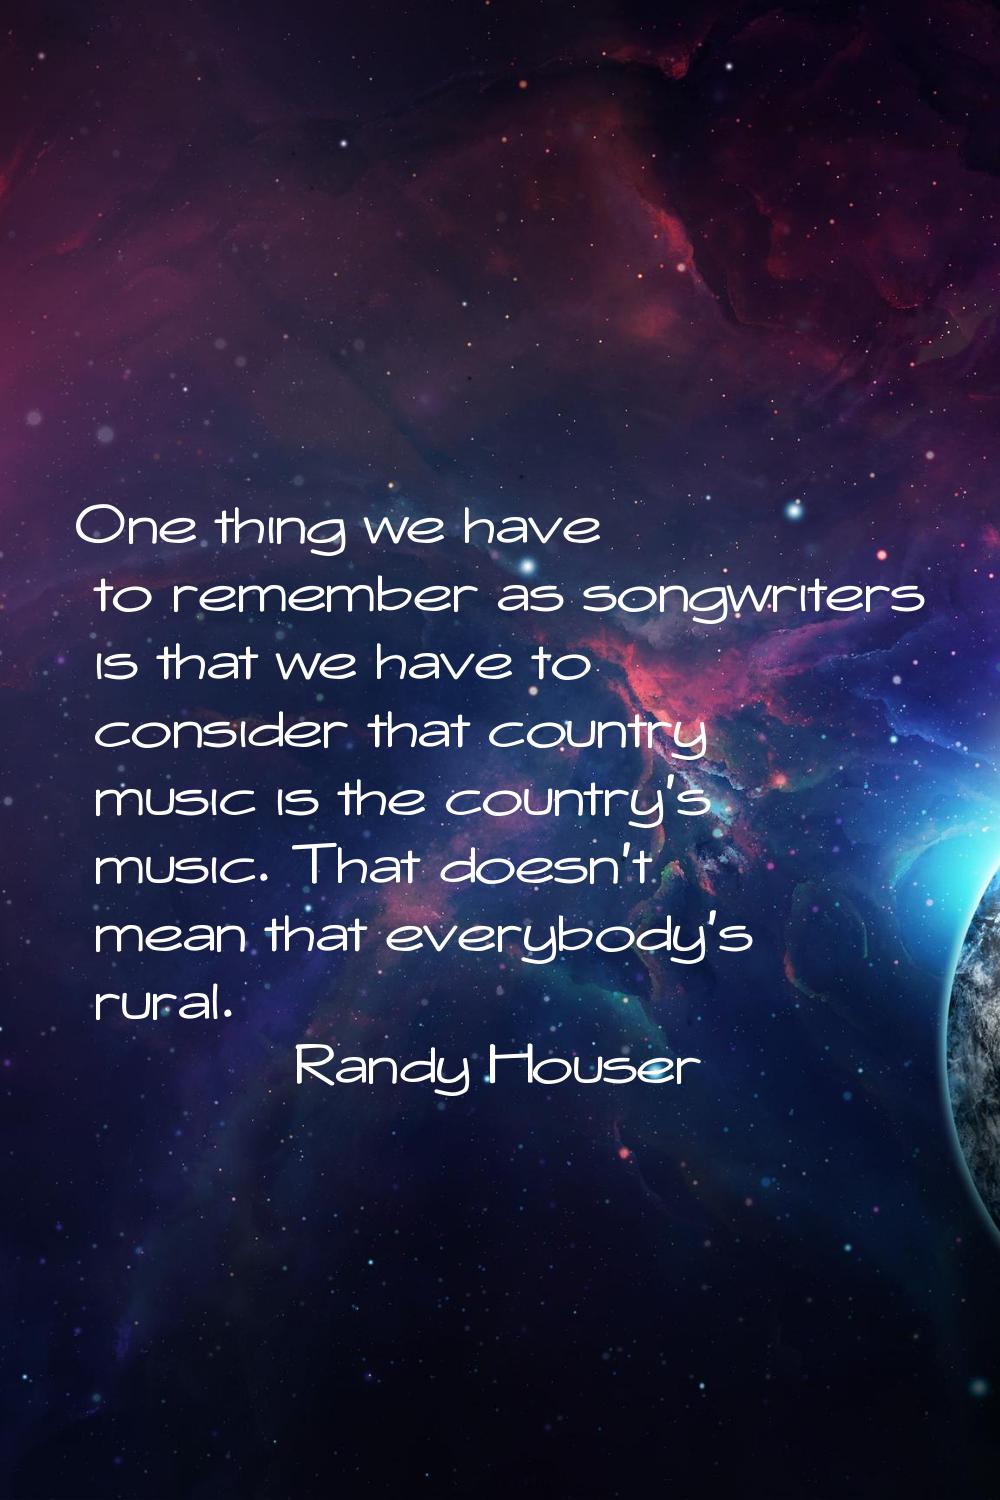 One thing we have to remember as songwriters is that we have to consider that country music is the 